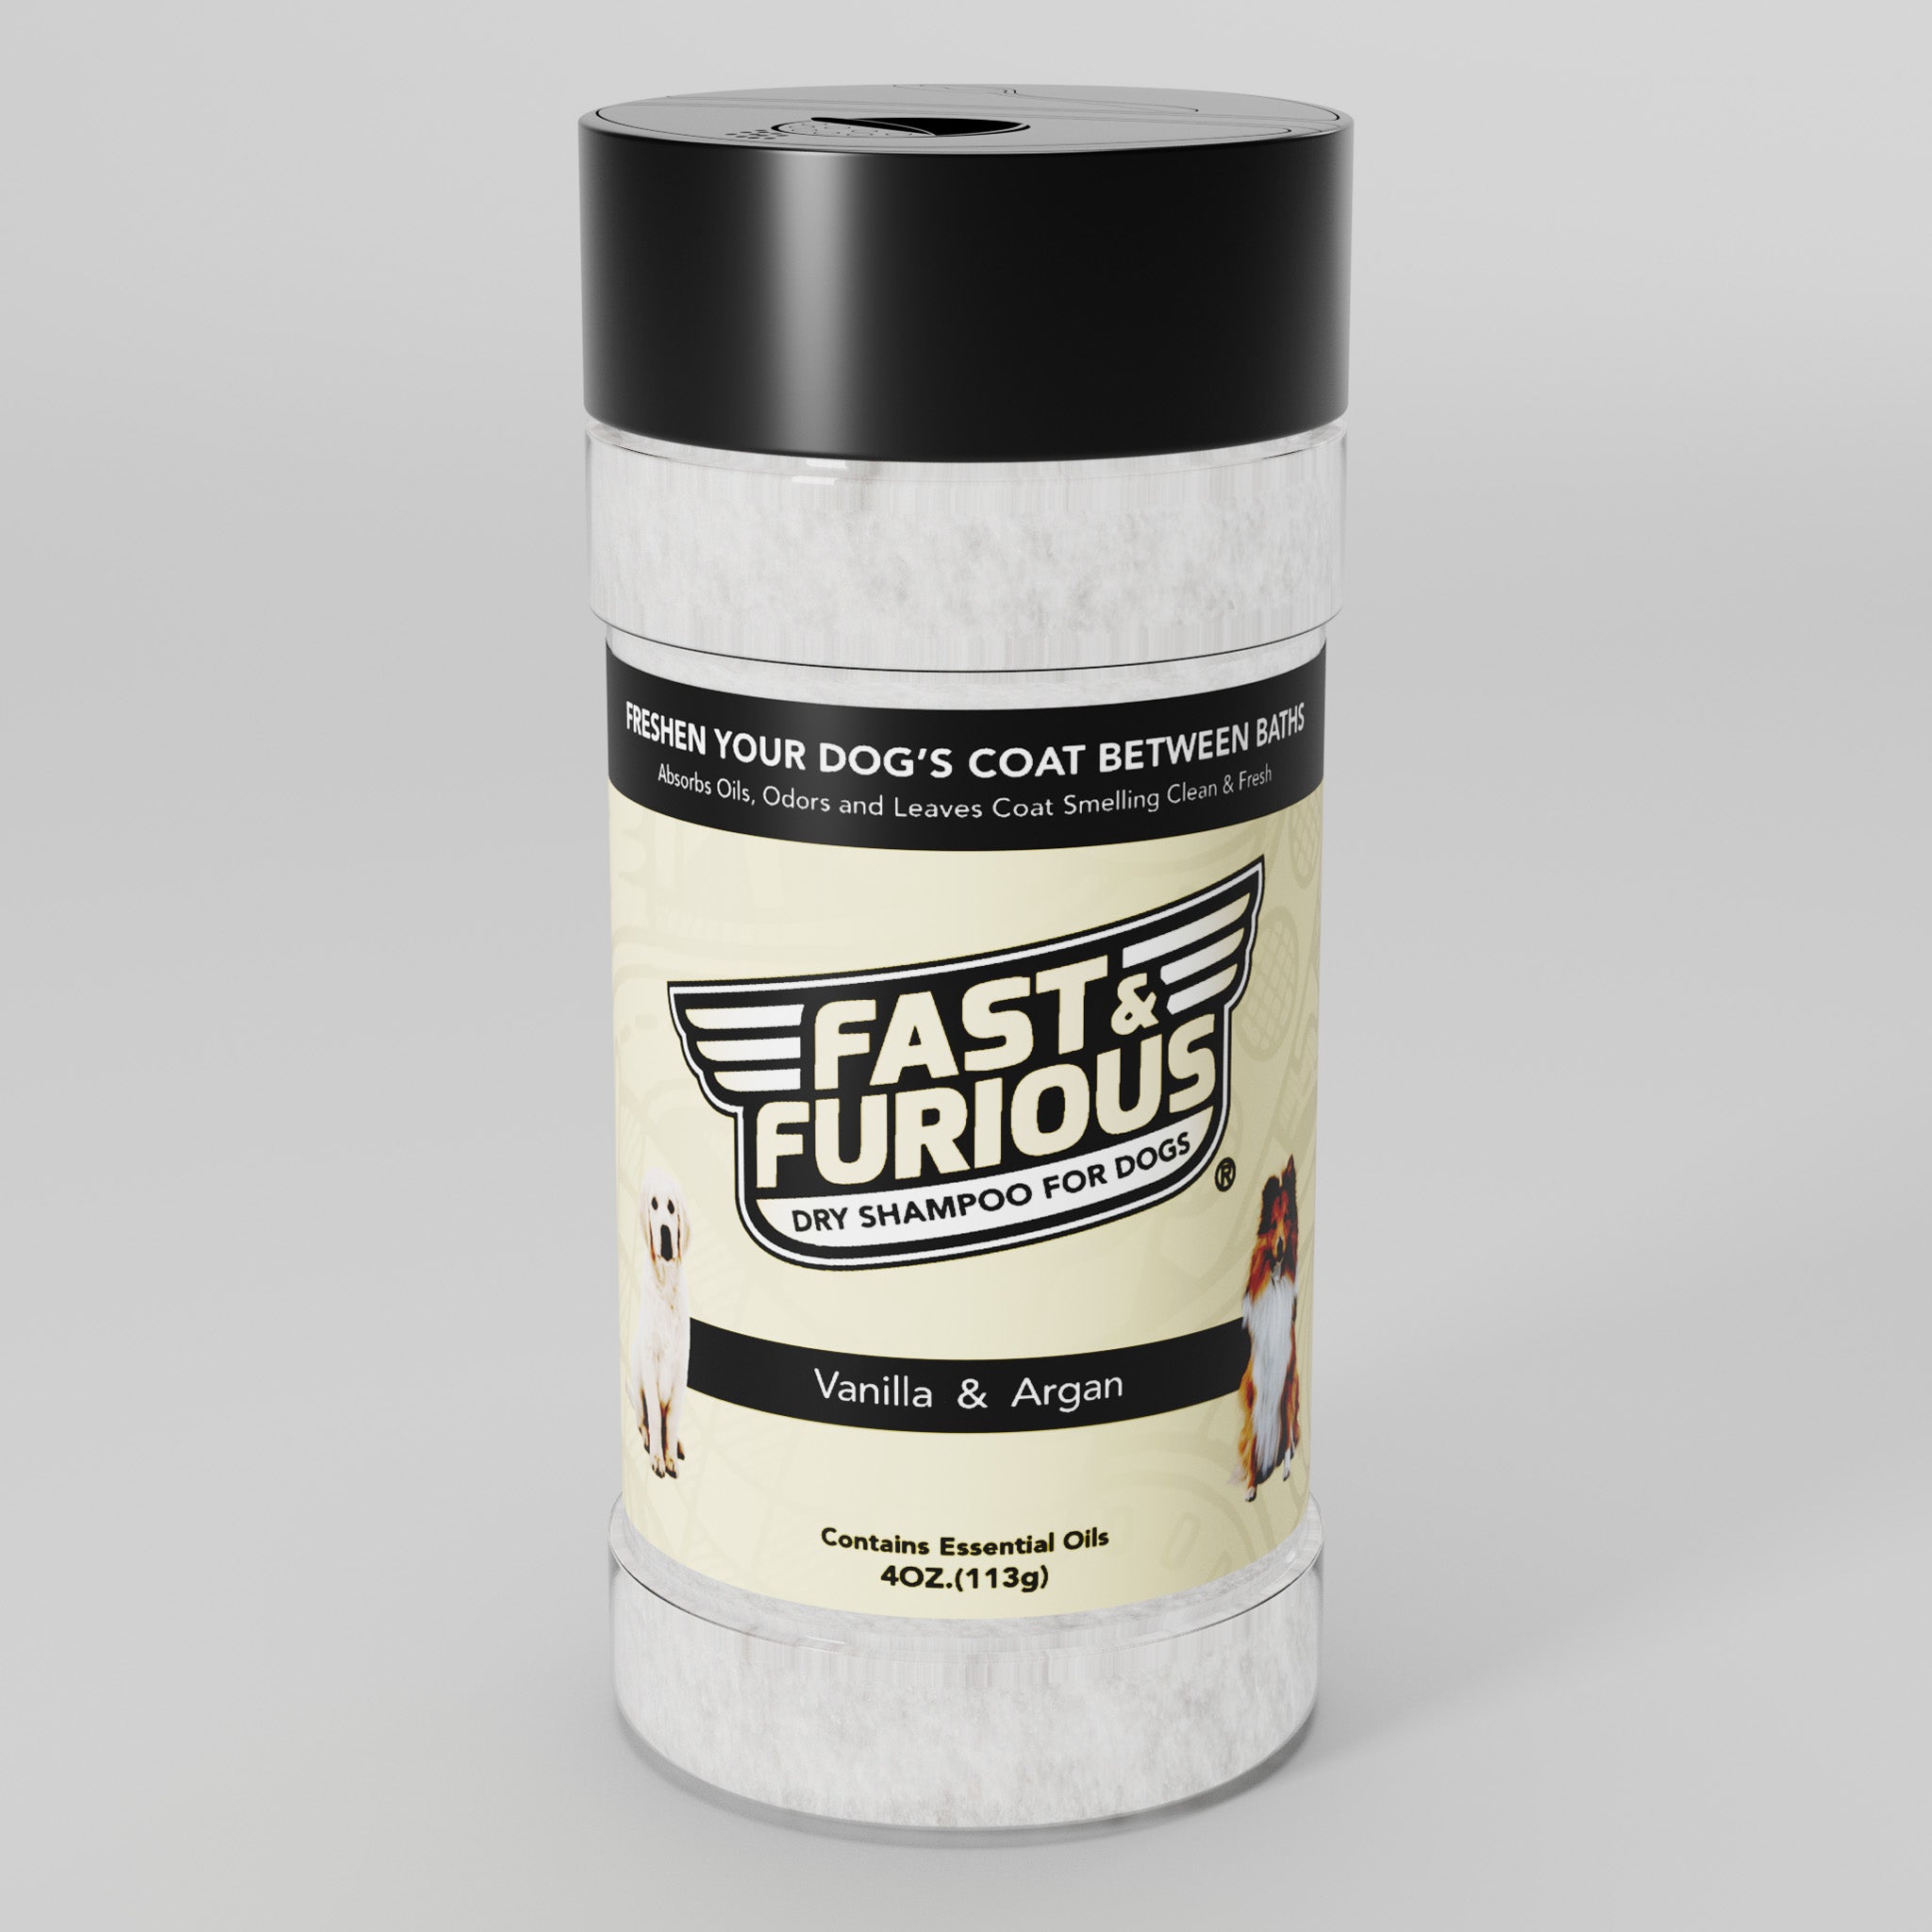 Fast & Furious Dry Shampoo for Dogs - Vanilla and Argan Scent